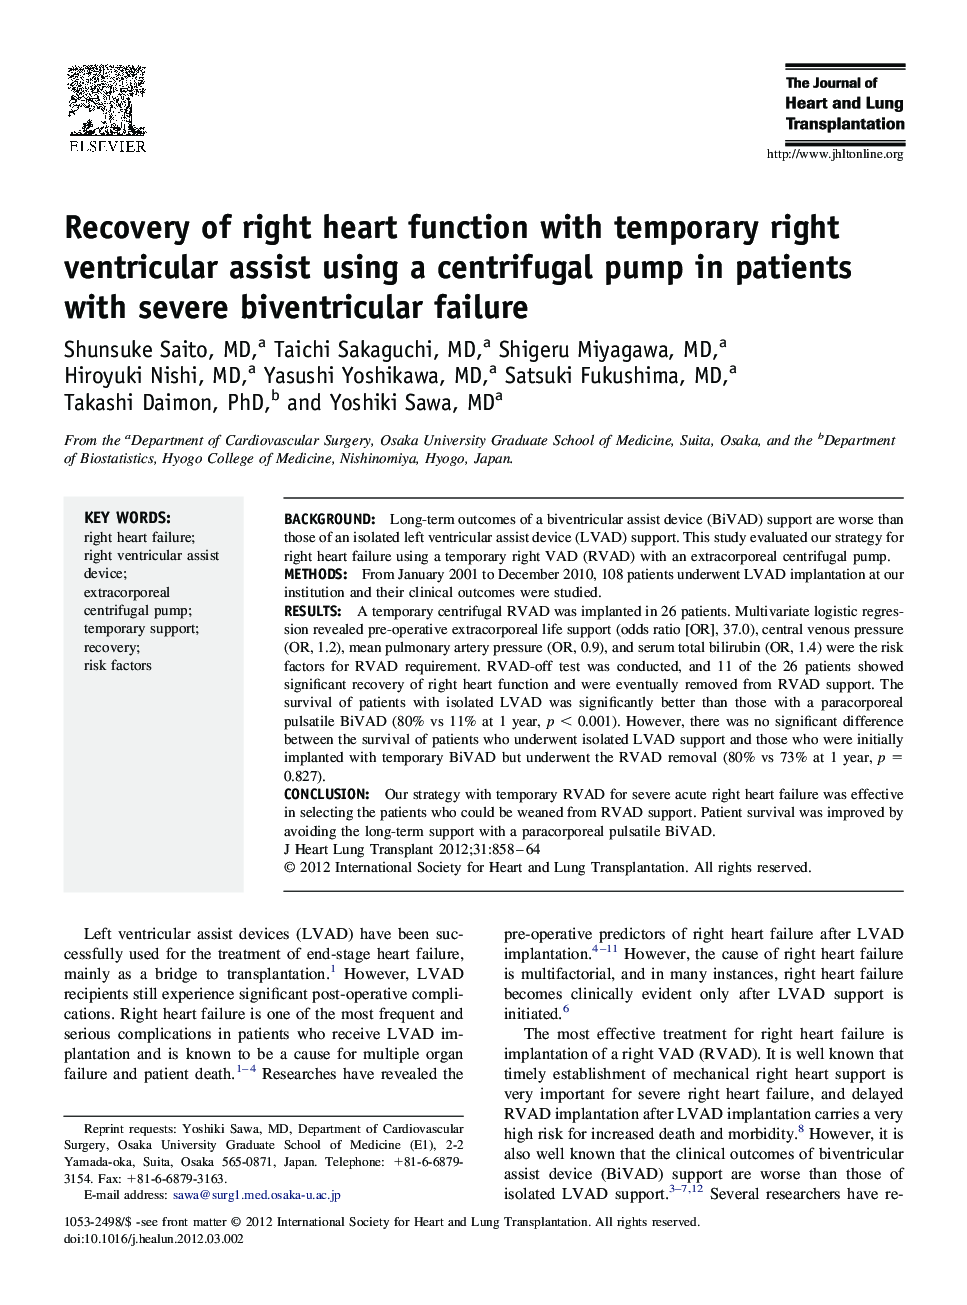 Recovery of right heart function with temporary right ventricular assist using a centrifugal pump in patients with severe biventricular failure